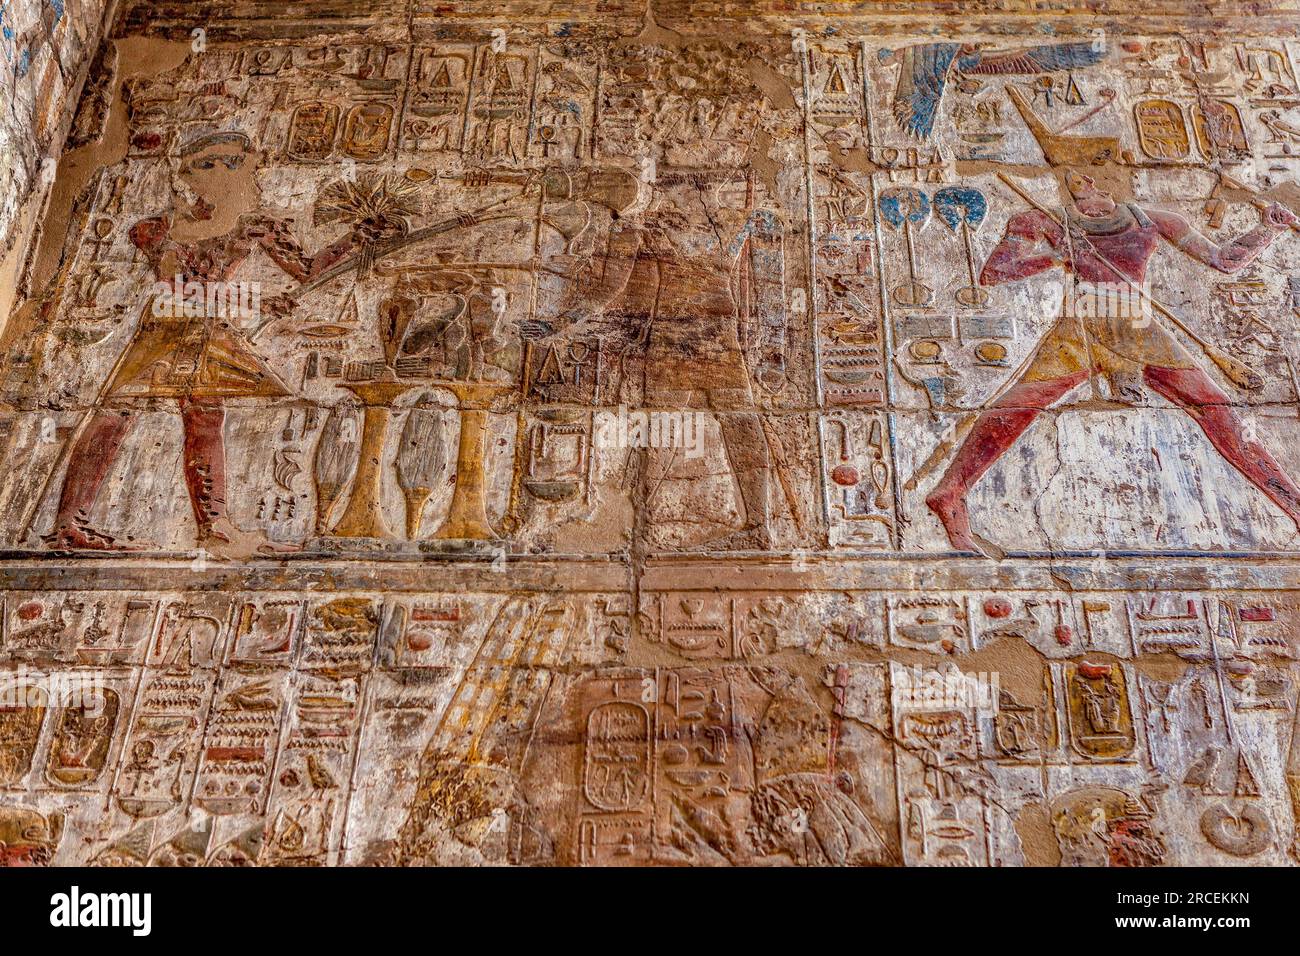 Colourful wall paintings in Luxor Temple, Egypt Stock Photo